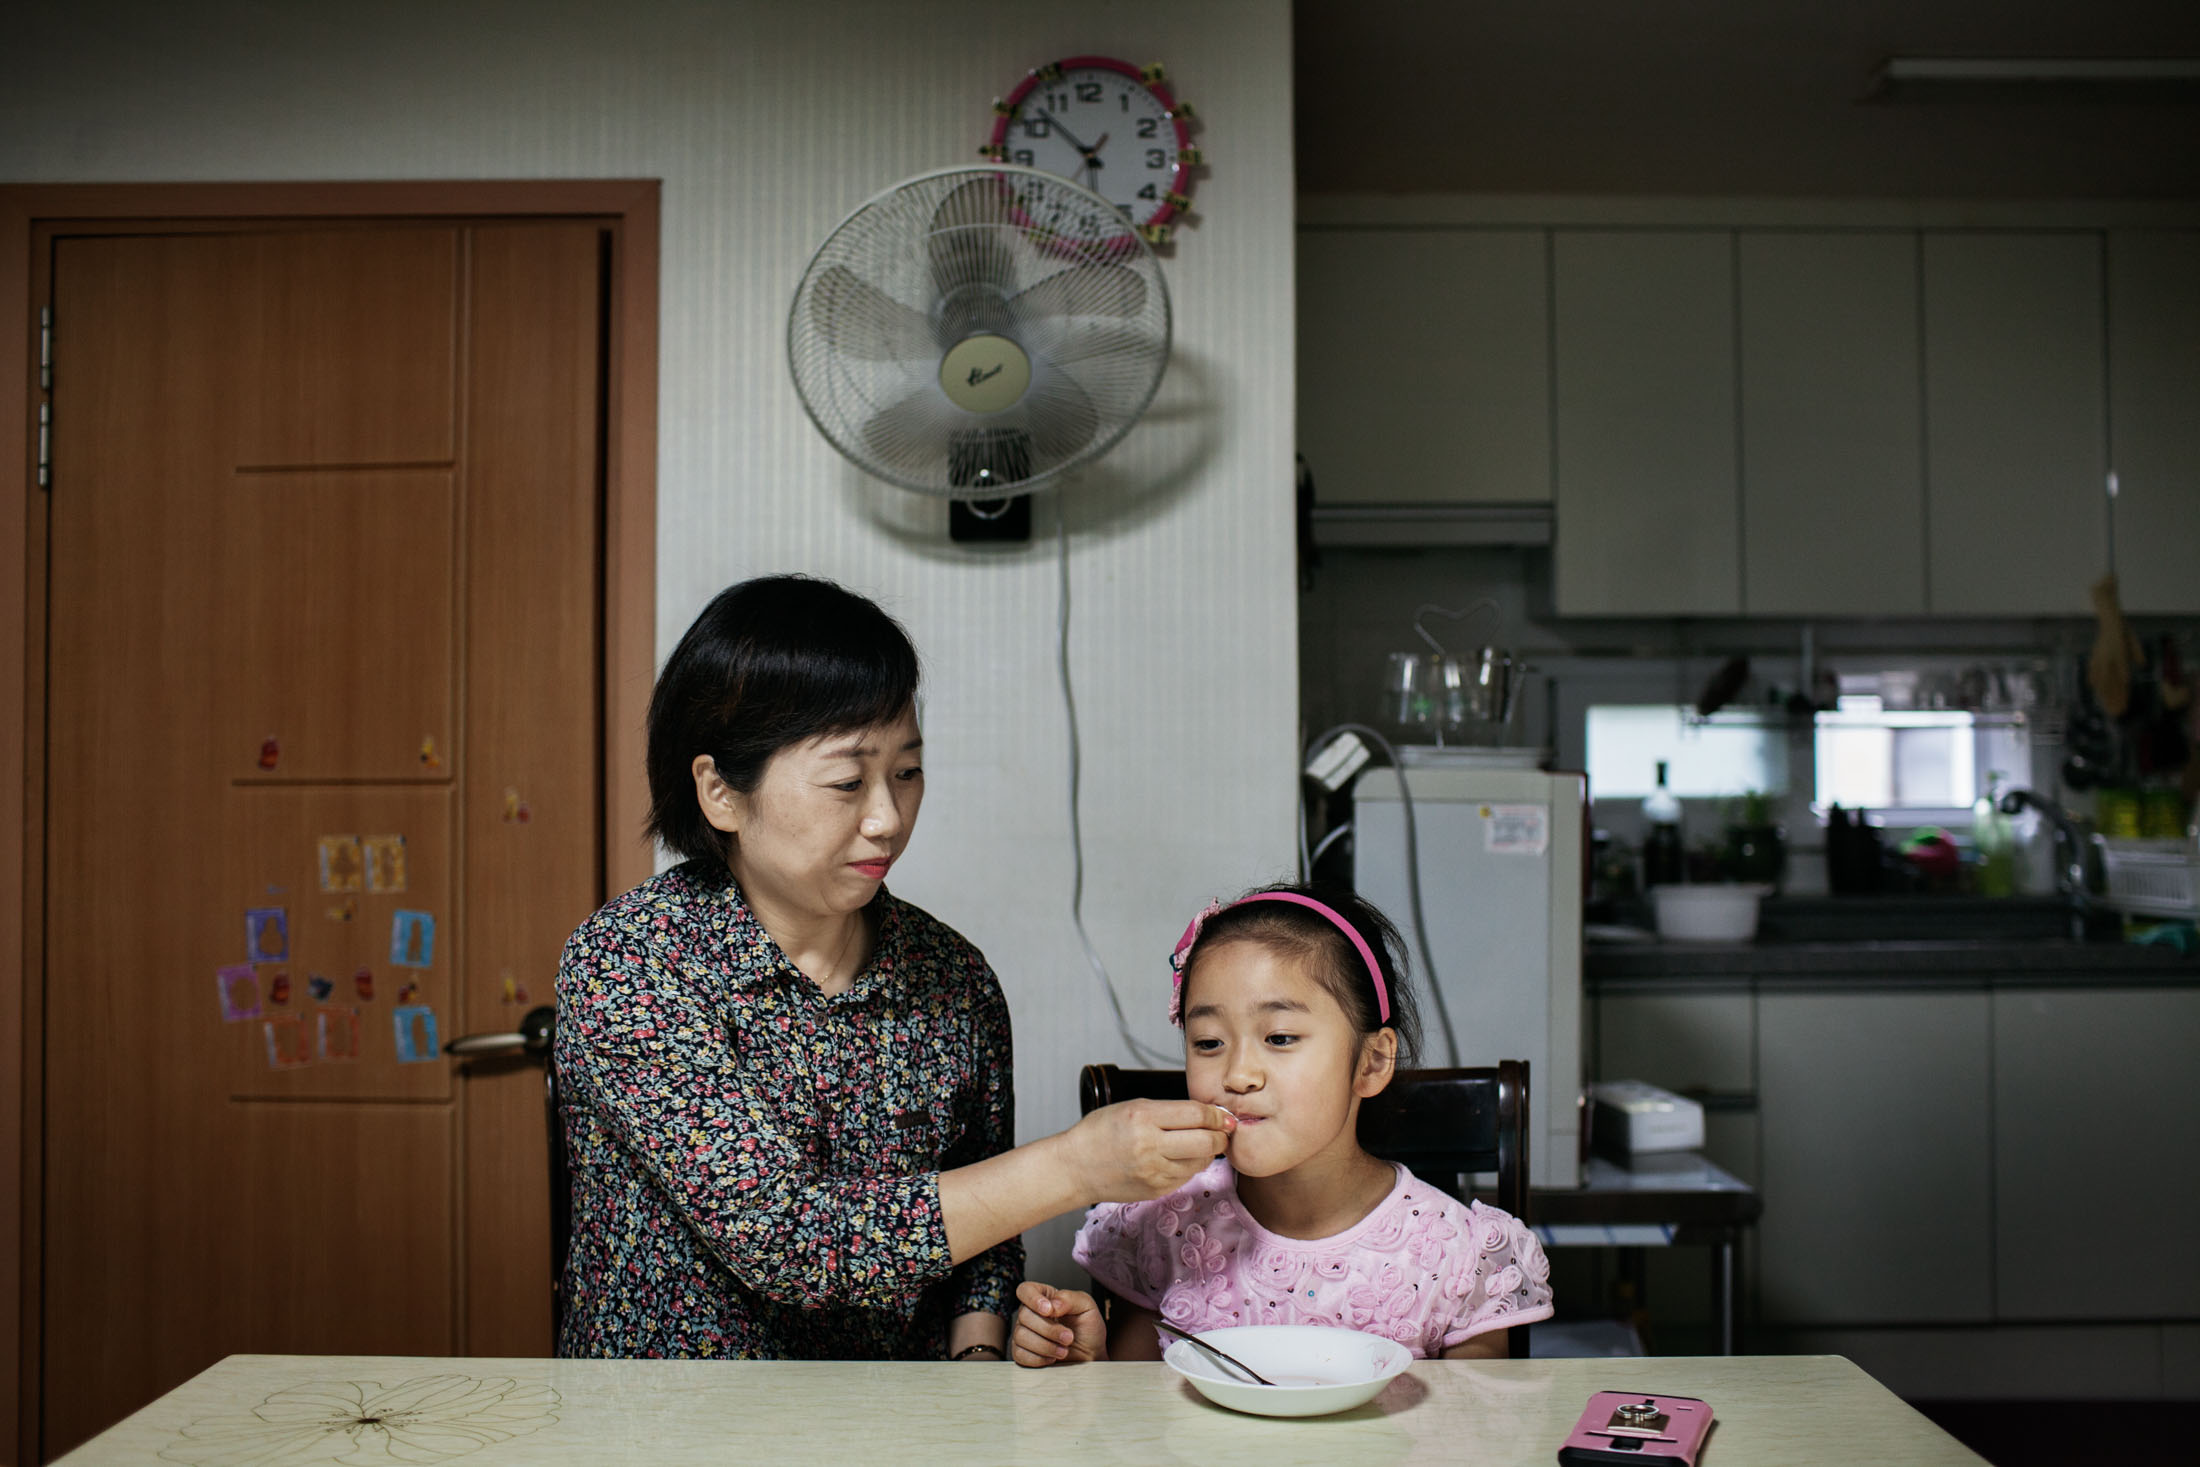 Park Min-sook at home with her daughter Ju-hyun in Danyang, South Korea. Park, 44, worked at a Samsung semiconductor factory for seven years. She later suffered from breast cancer, infertility, and a miscarriage.
